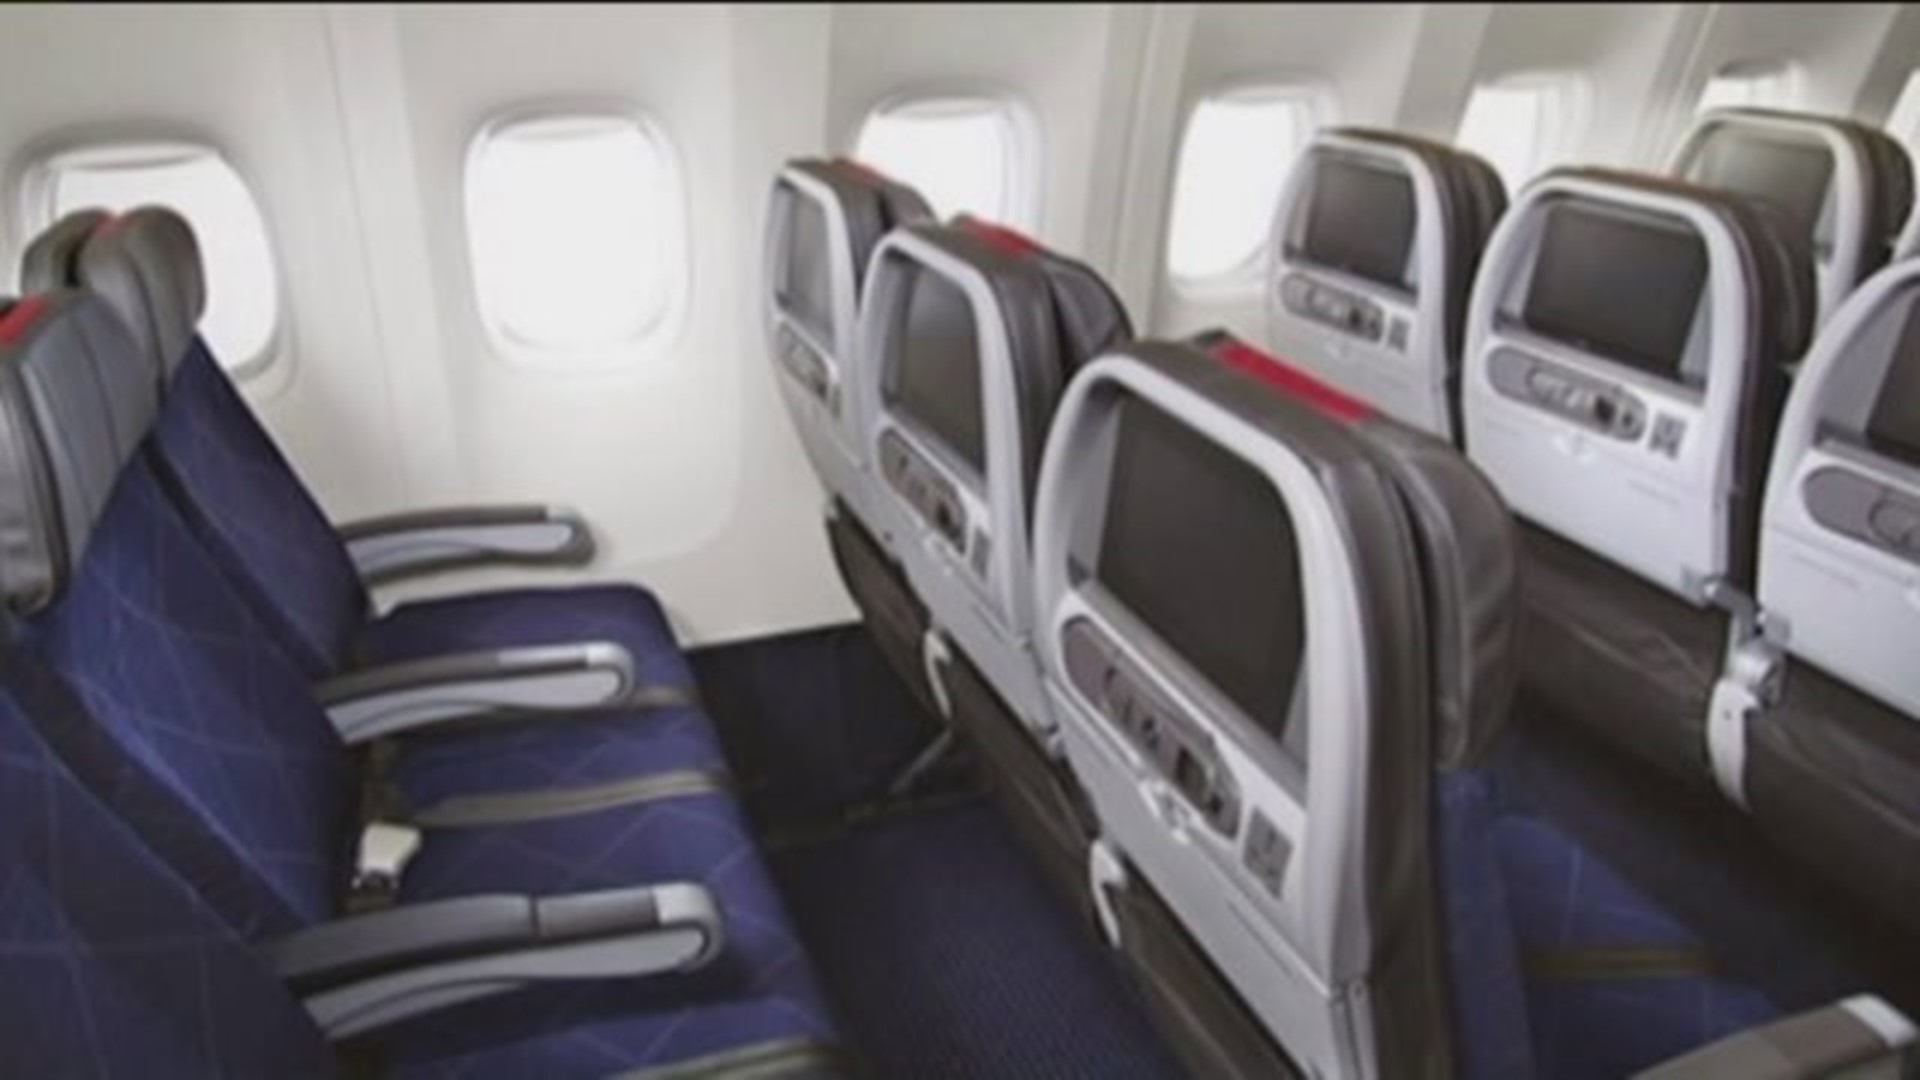 Lawmakers argue for regulation of airplane seat width